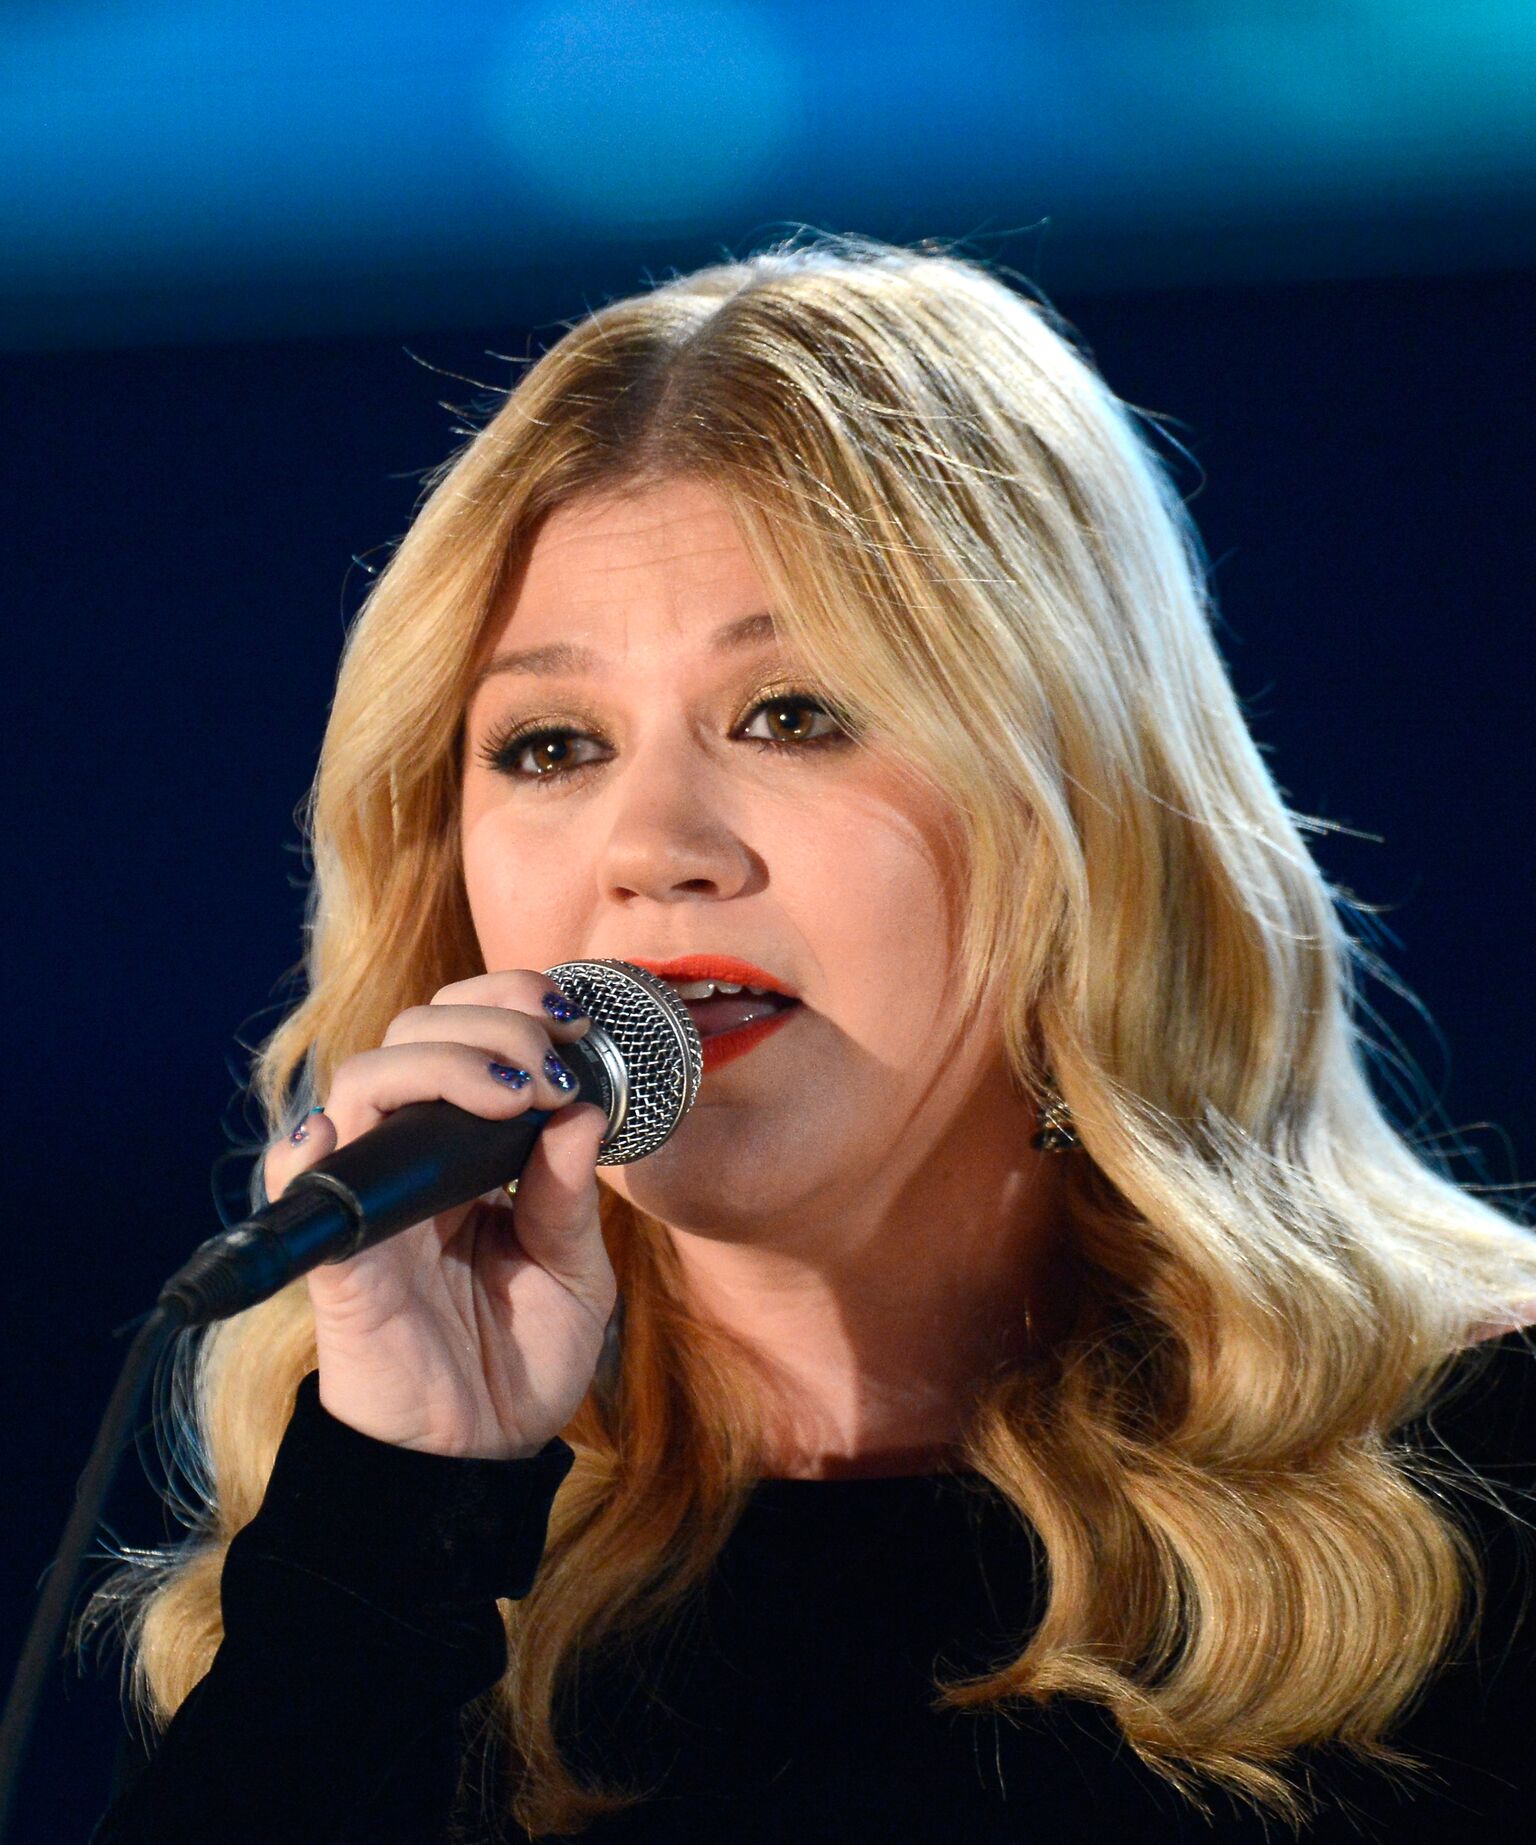  Kelly Clarkson performs onstage at the 55th Annual GRAMMY Awards at Staples Center | Getty Images